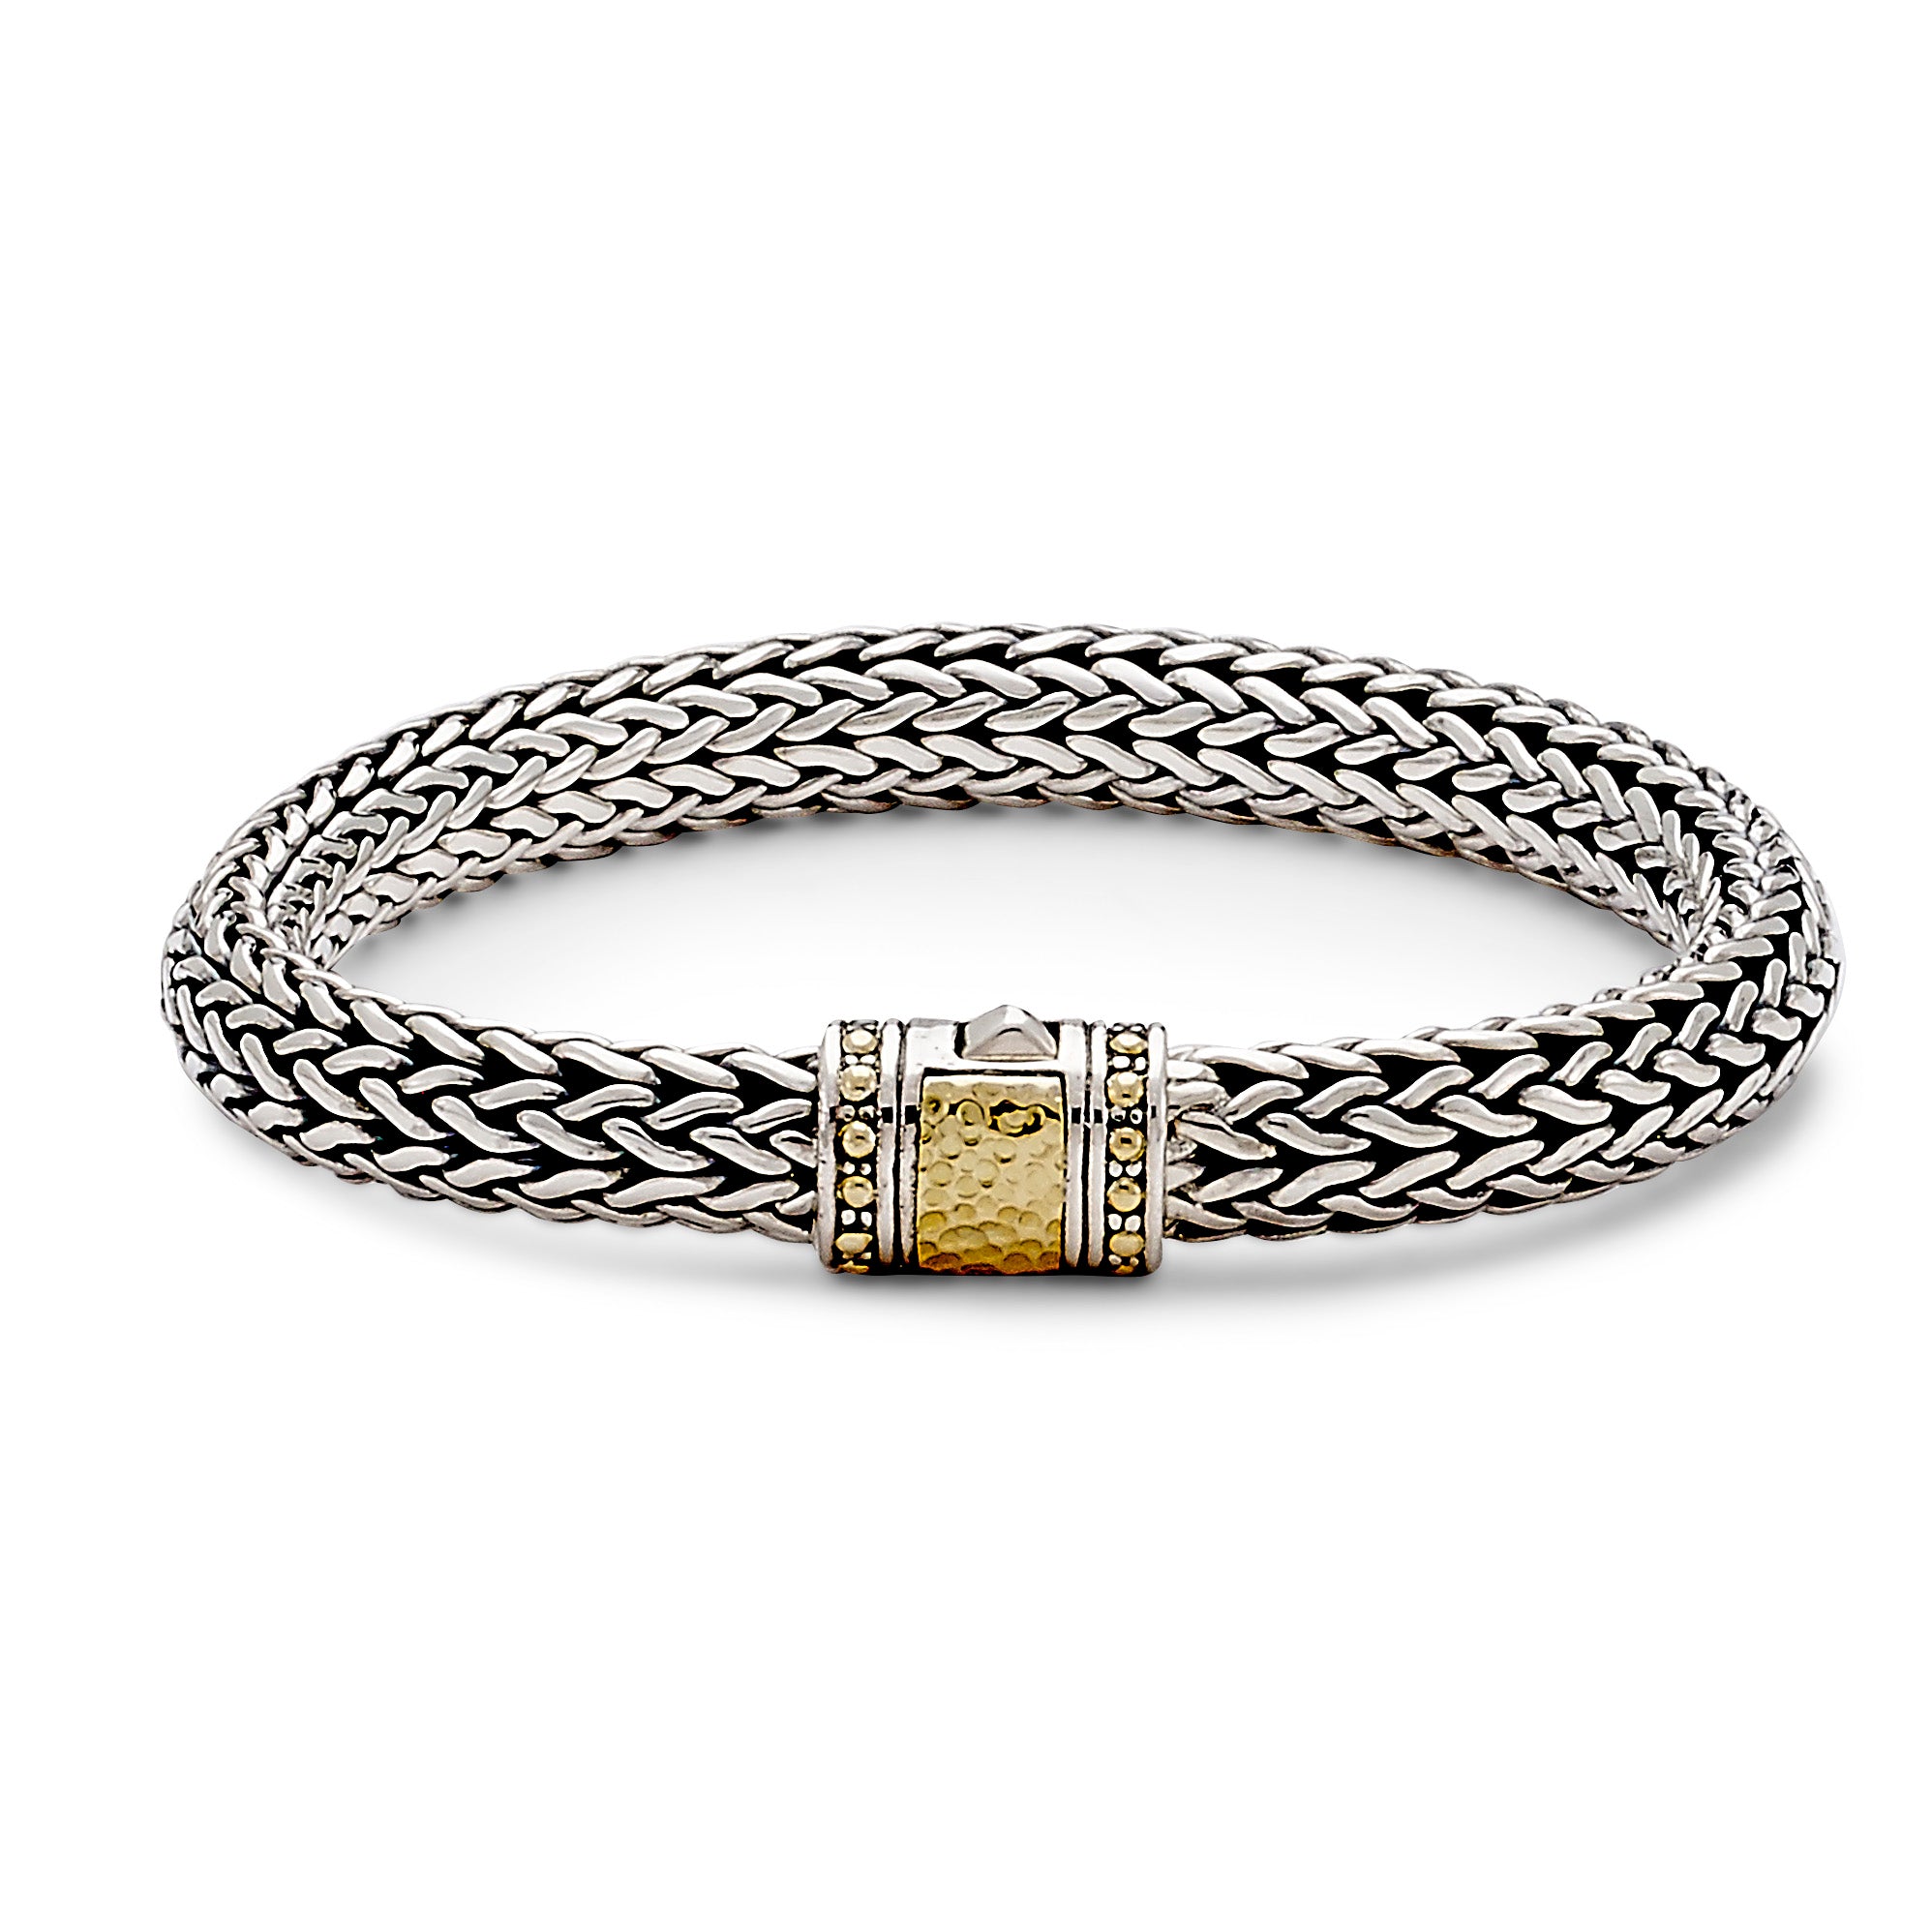 Emas Bracelet available at Talisman Collection Fine Jewelers in El Dorado Hills, CA and online. Specs:  Emas Bracelet crafted in Sterling Silver and 18k hammered gold, 6x8mm, 8". 